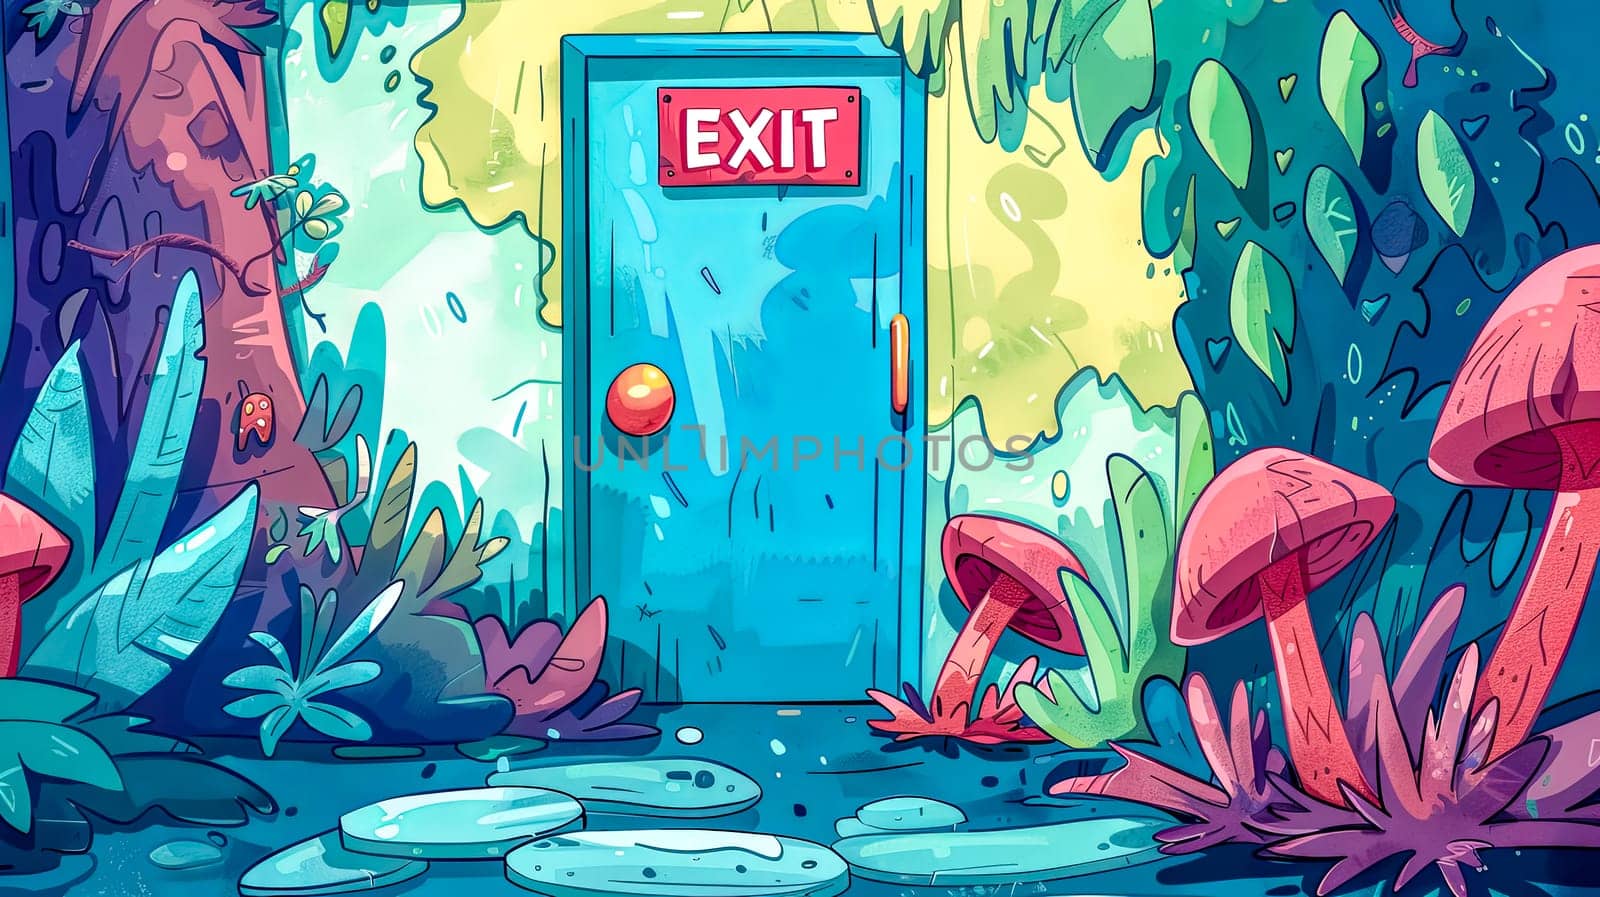 Vibrant artwork of a magical forest with an exit door amidst fantastical flora